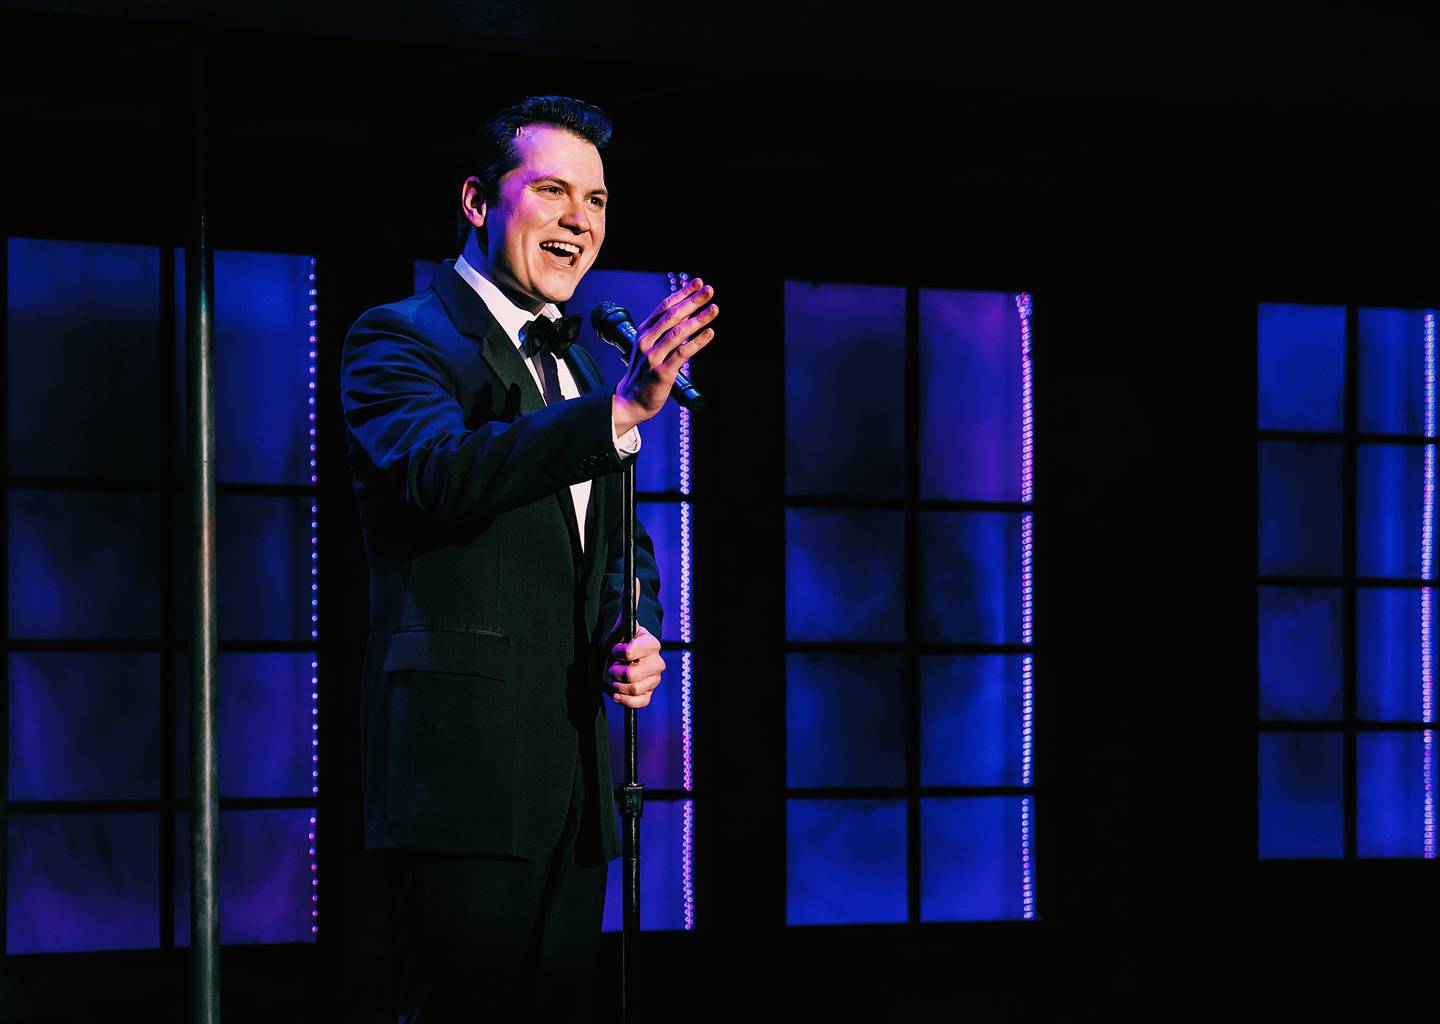 "Jersey Boys" extended through July 28 at Mercury Theater in Chicago, with Michael Metcalf as Frankie Valli.